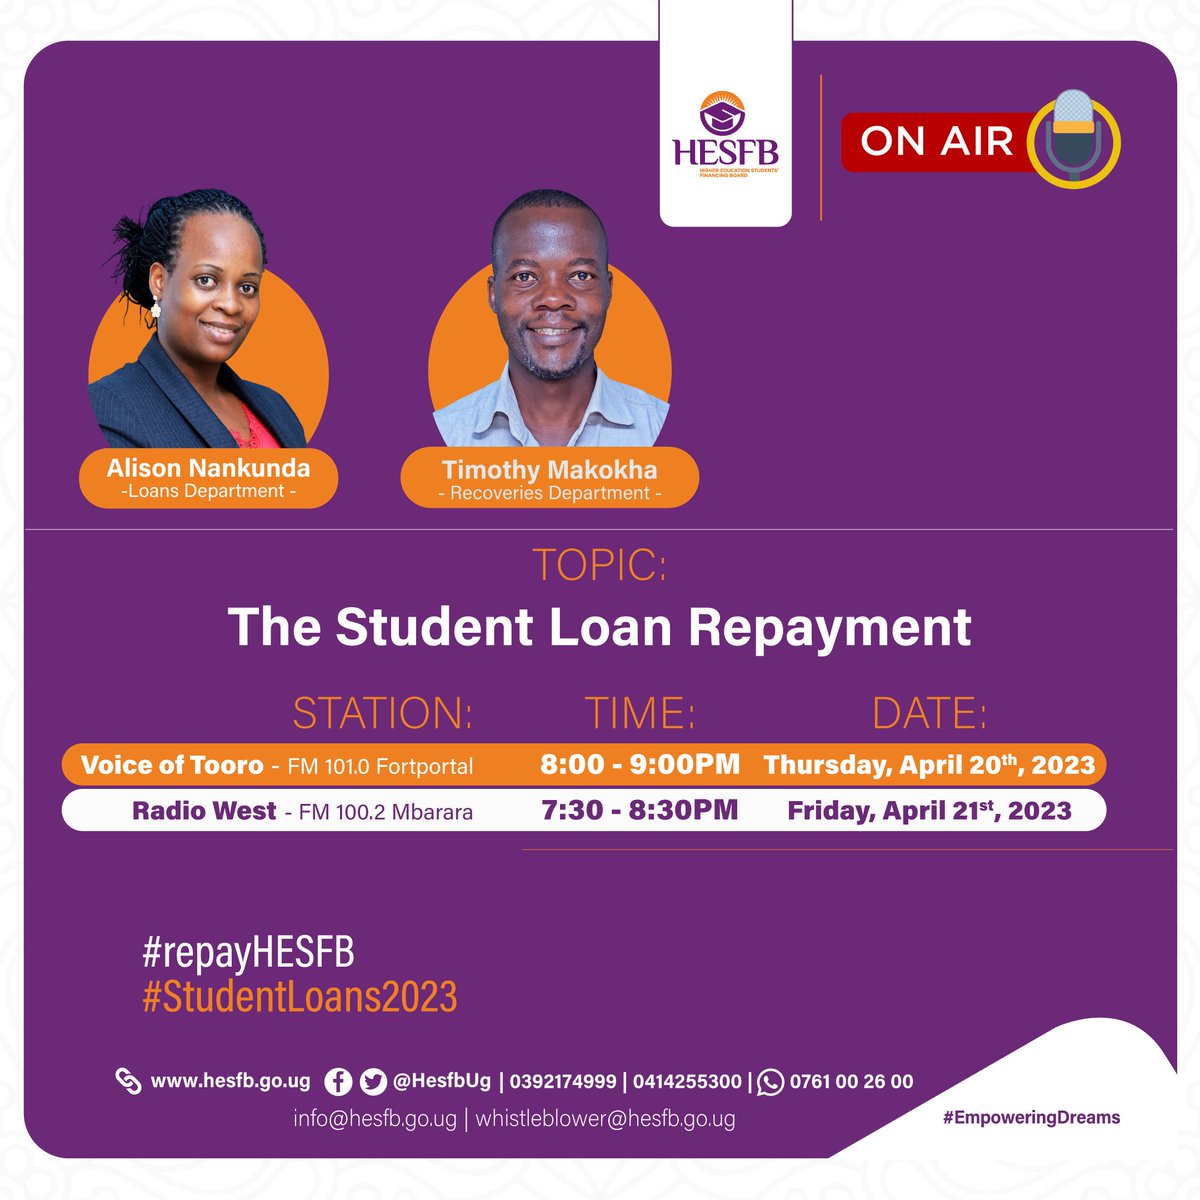 This evening, @HESFBUG's Alison Nankunda and Timothy Makokha will be in Fort Portal discussing the Students Loan Repayment.

Catch the discussion live on @VoiceofToro from 8 to 9pm.

#RepayHESFB #StudentLoans2023

@MoICT_Ug @Makerere @MosesWatasa @azawedde @Educ_SportsUg